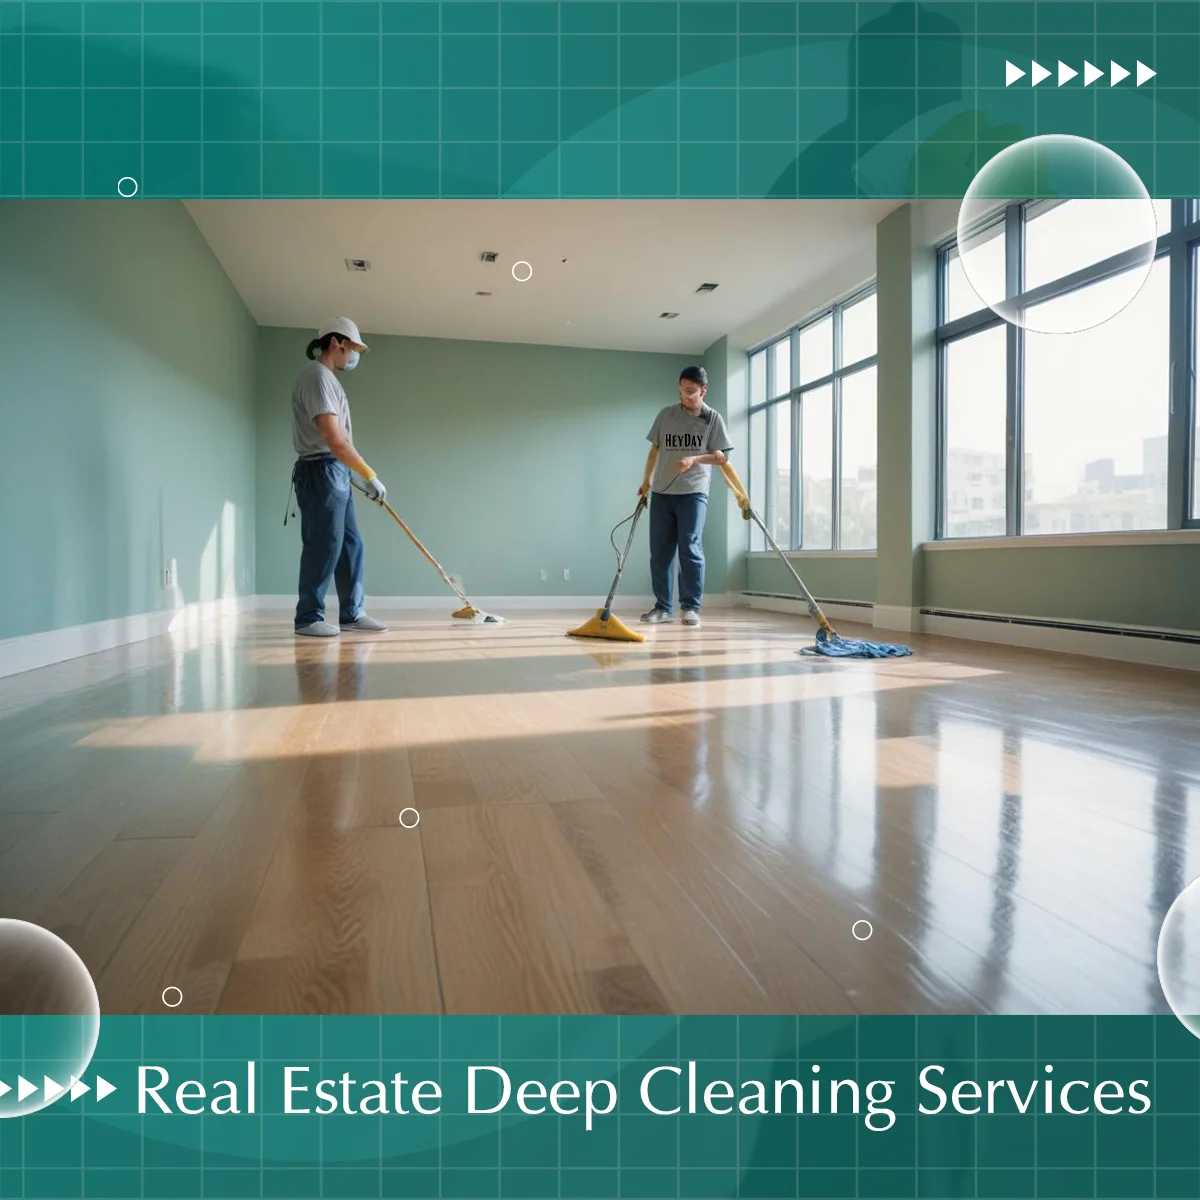 Real Estate Deep Cleaning